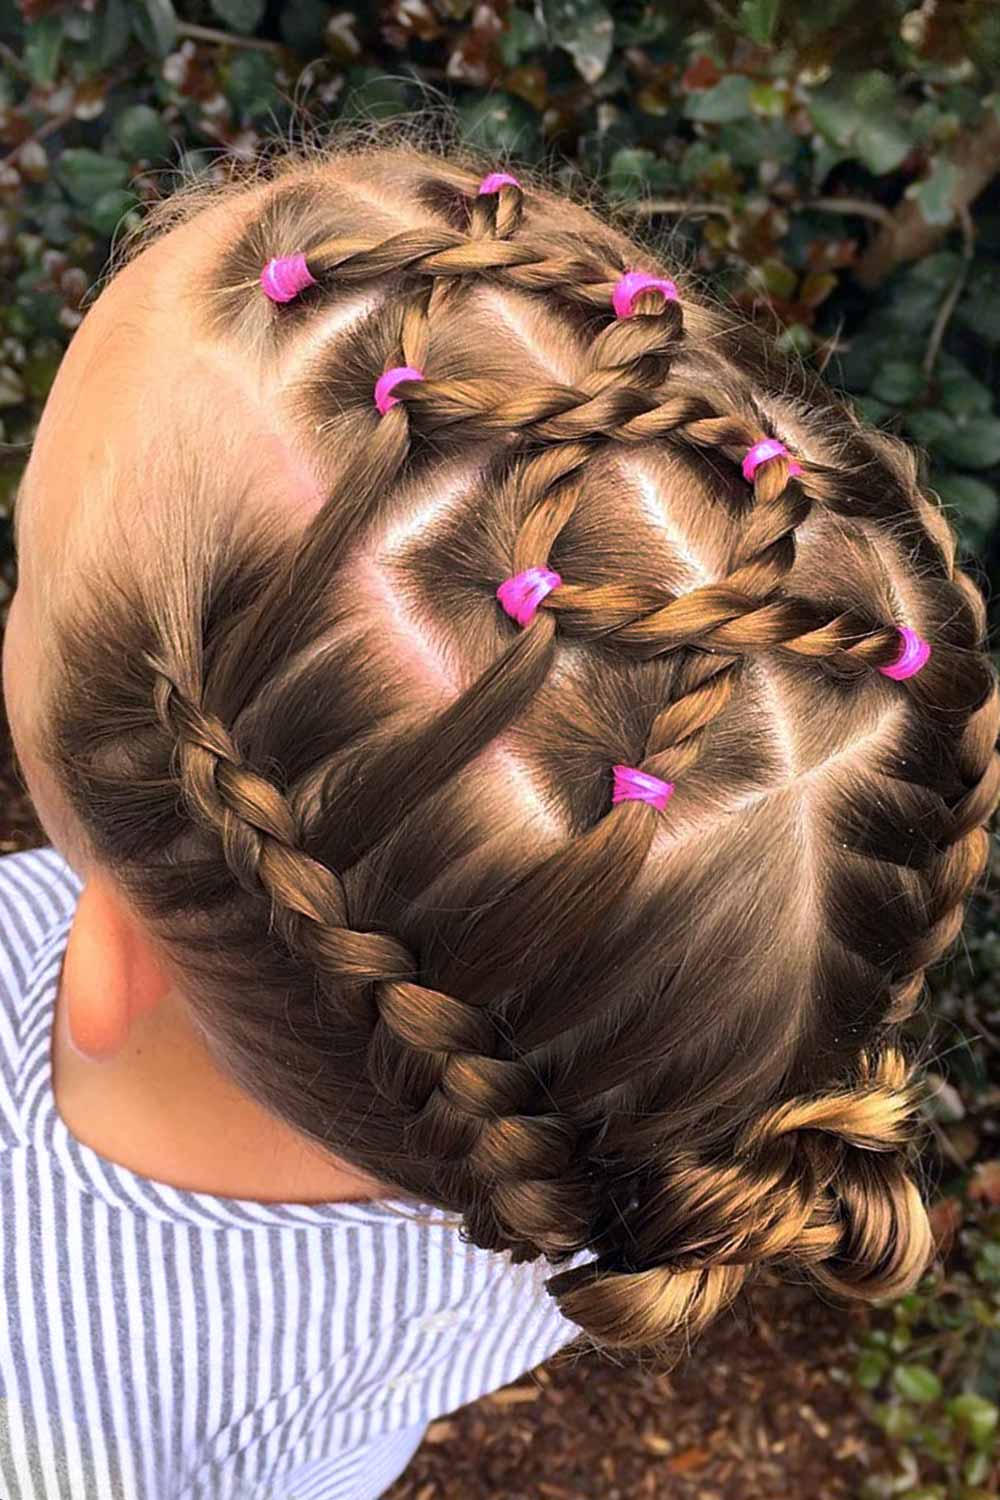 Rubber Band Hairstyles with Twist Braids for Girls #rubberbandhairstyles #naturalhairstyles #kidshairstyles